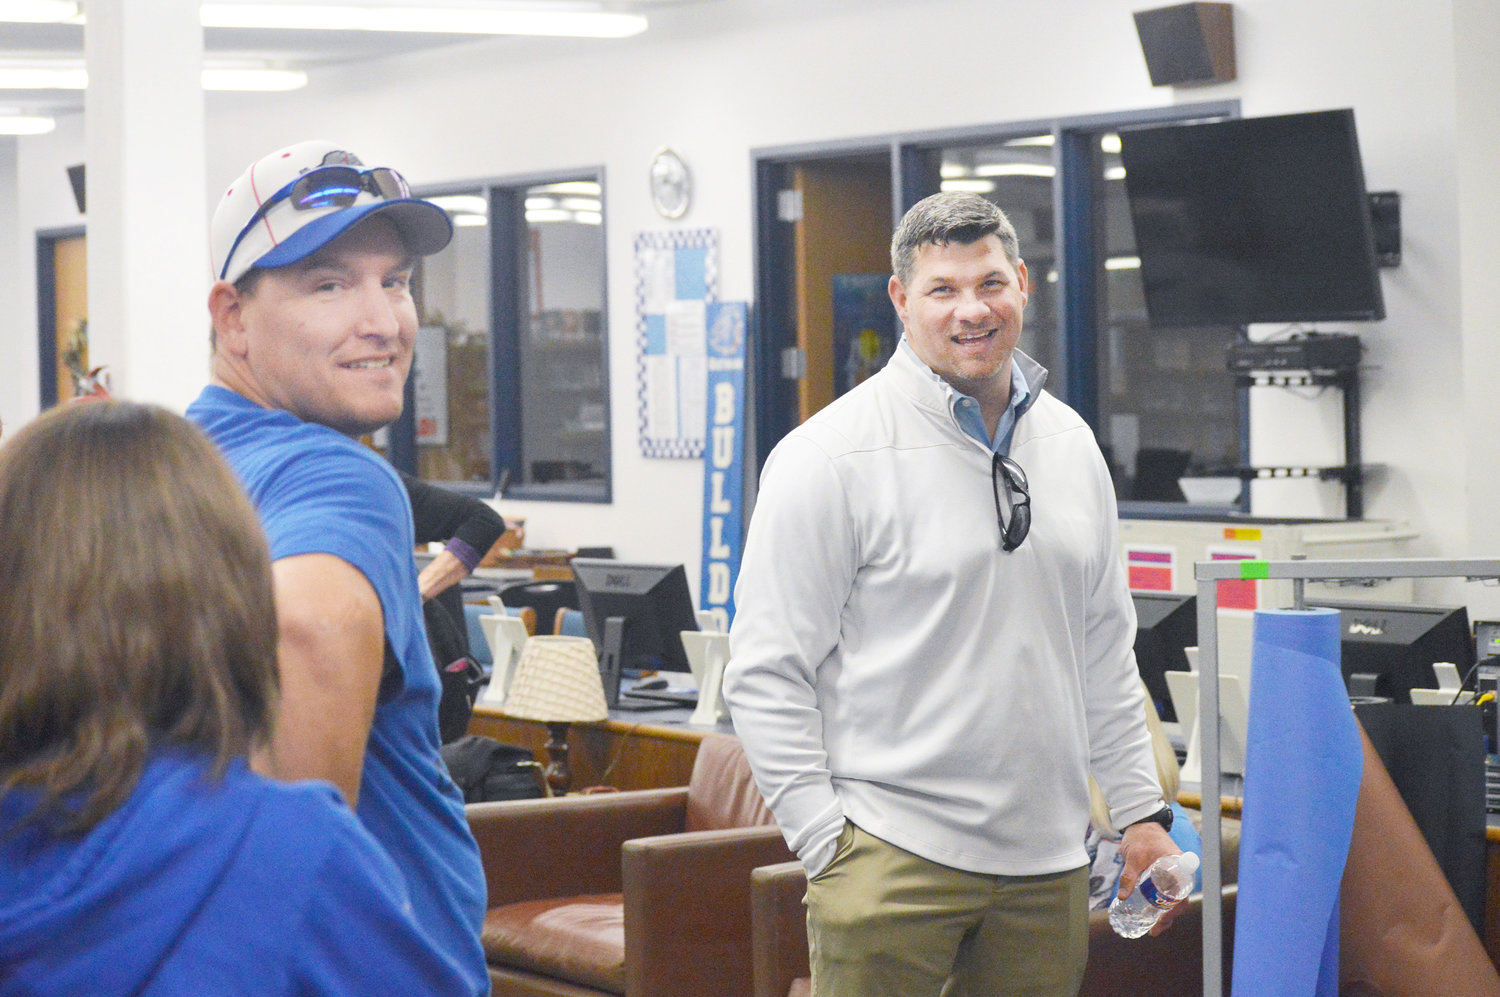 New Quitman Athletic Director and Head Football Coach Bryan Oakes visits with Brian Miller at Thursday’s “Meet the A.D.” gathering in the Quitman High School library. (Monitor photo by Larry Tucker)